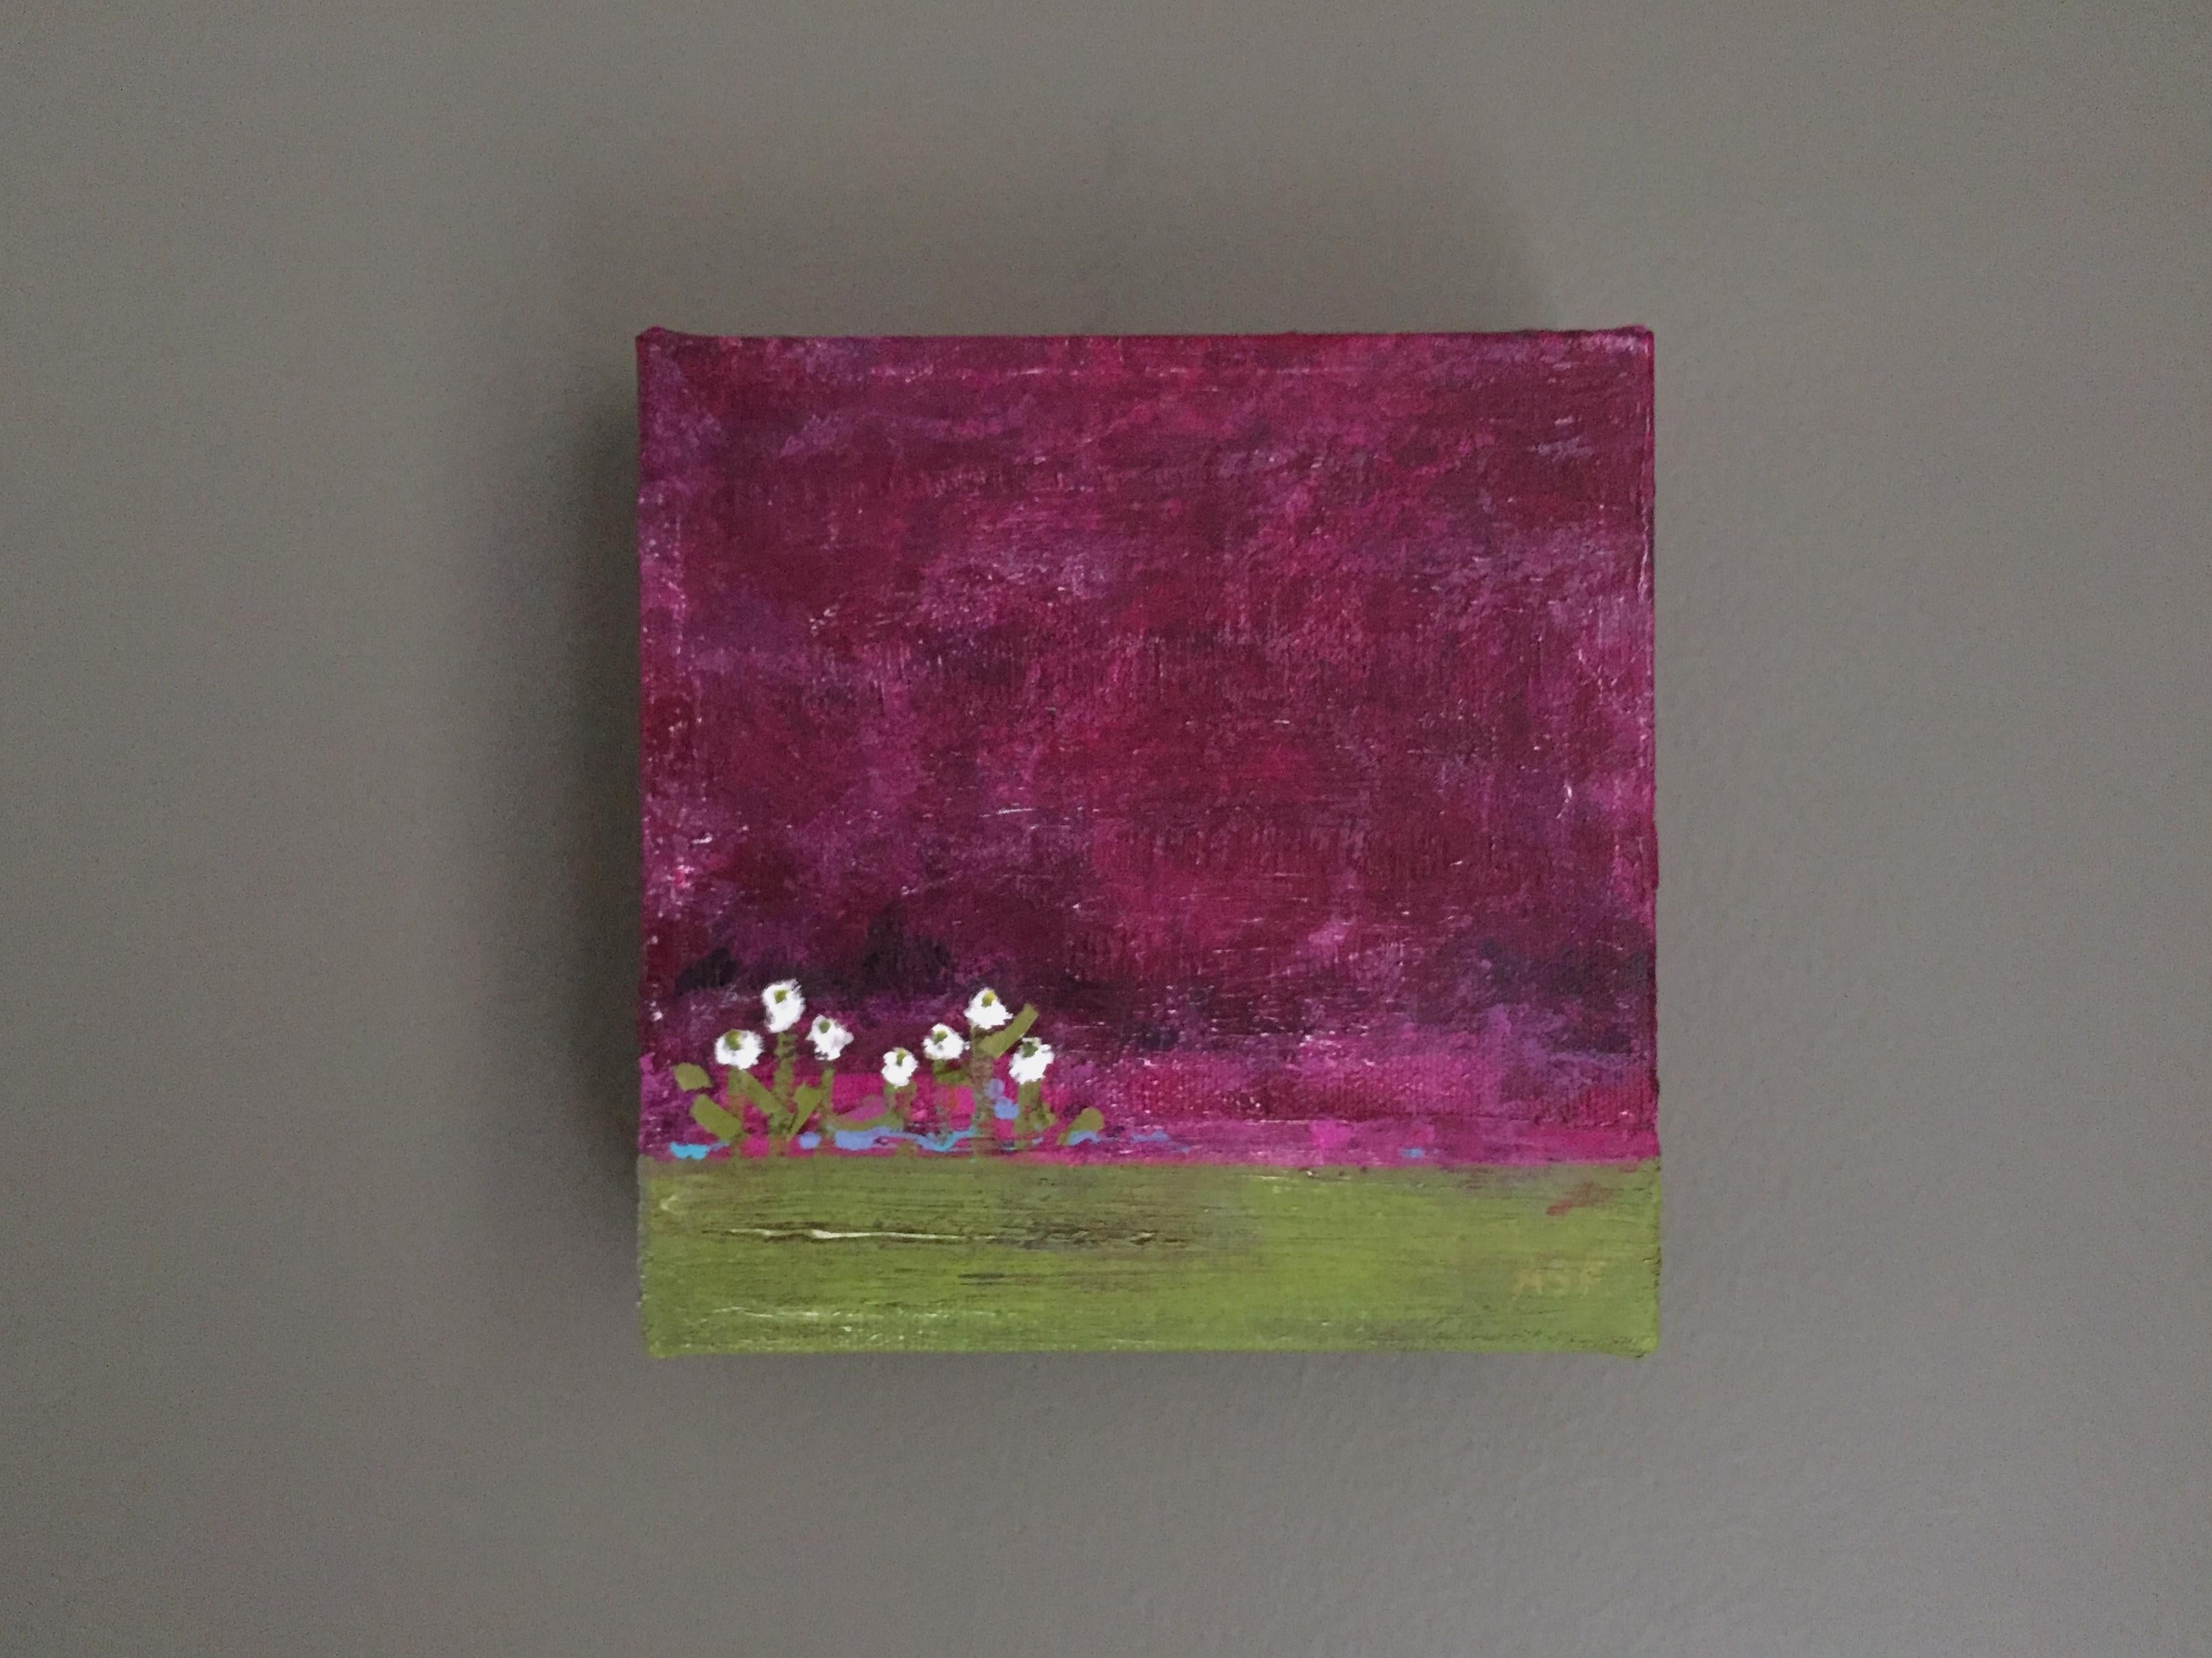 Tiny White Flowers 1 (6”x6”, small floral landscape)